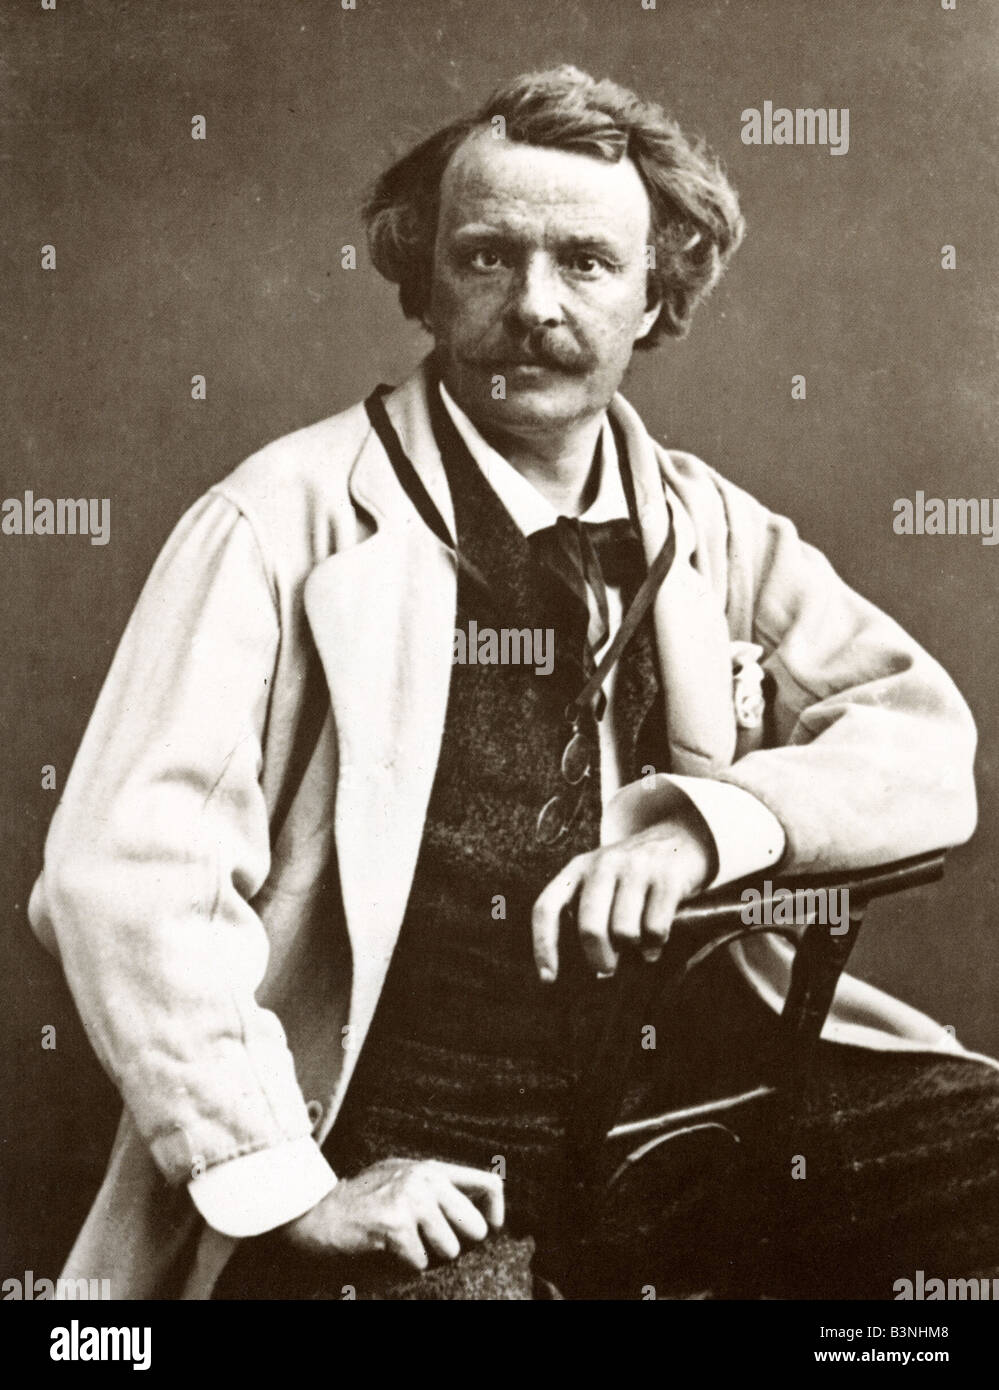 Image result for 1910, Nadar, French photographer